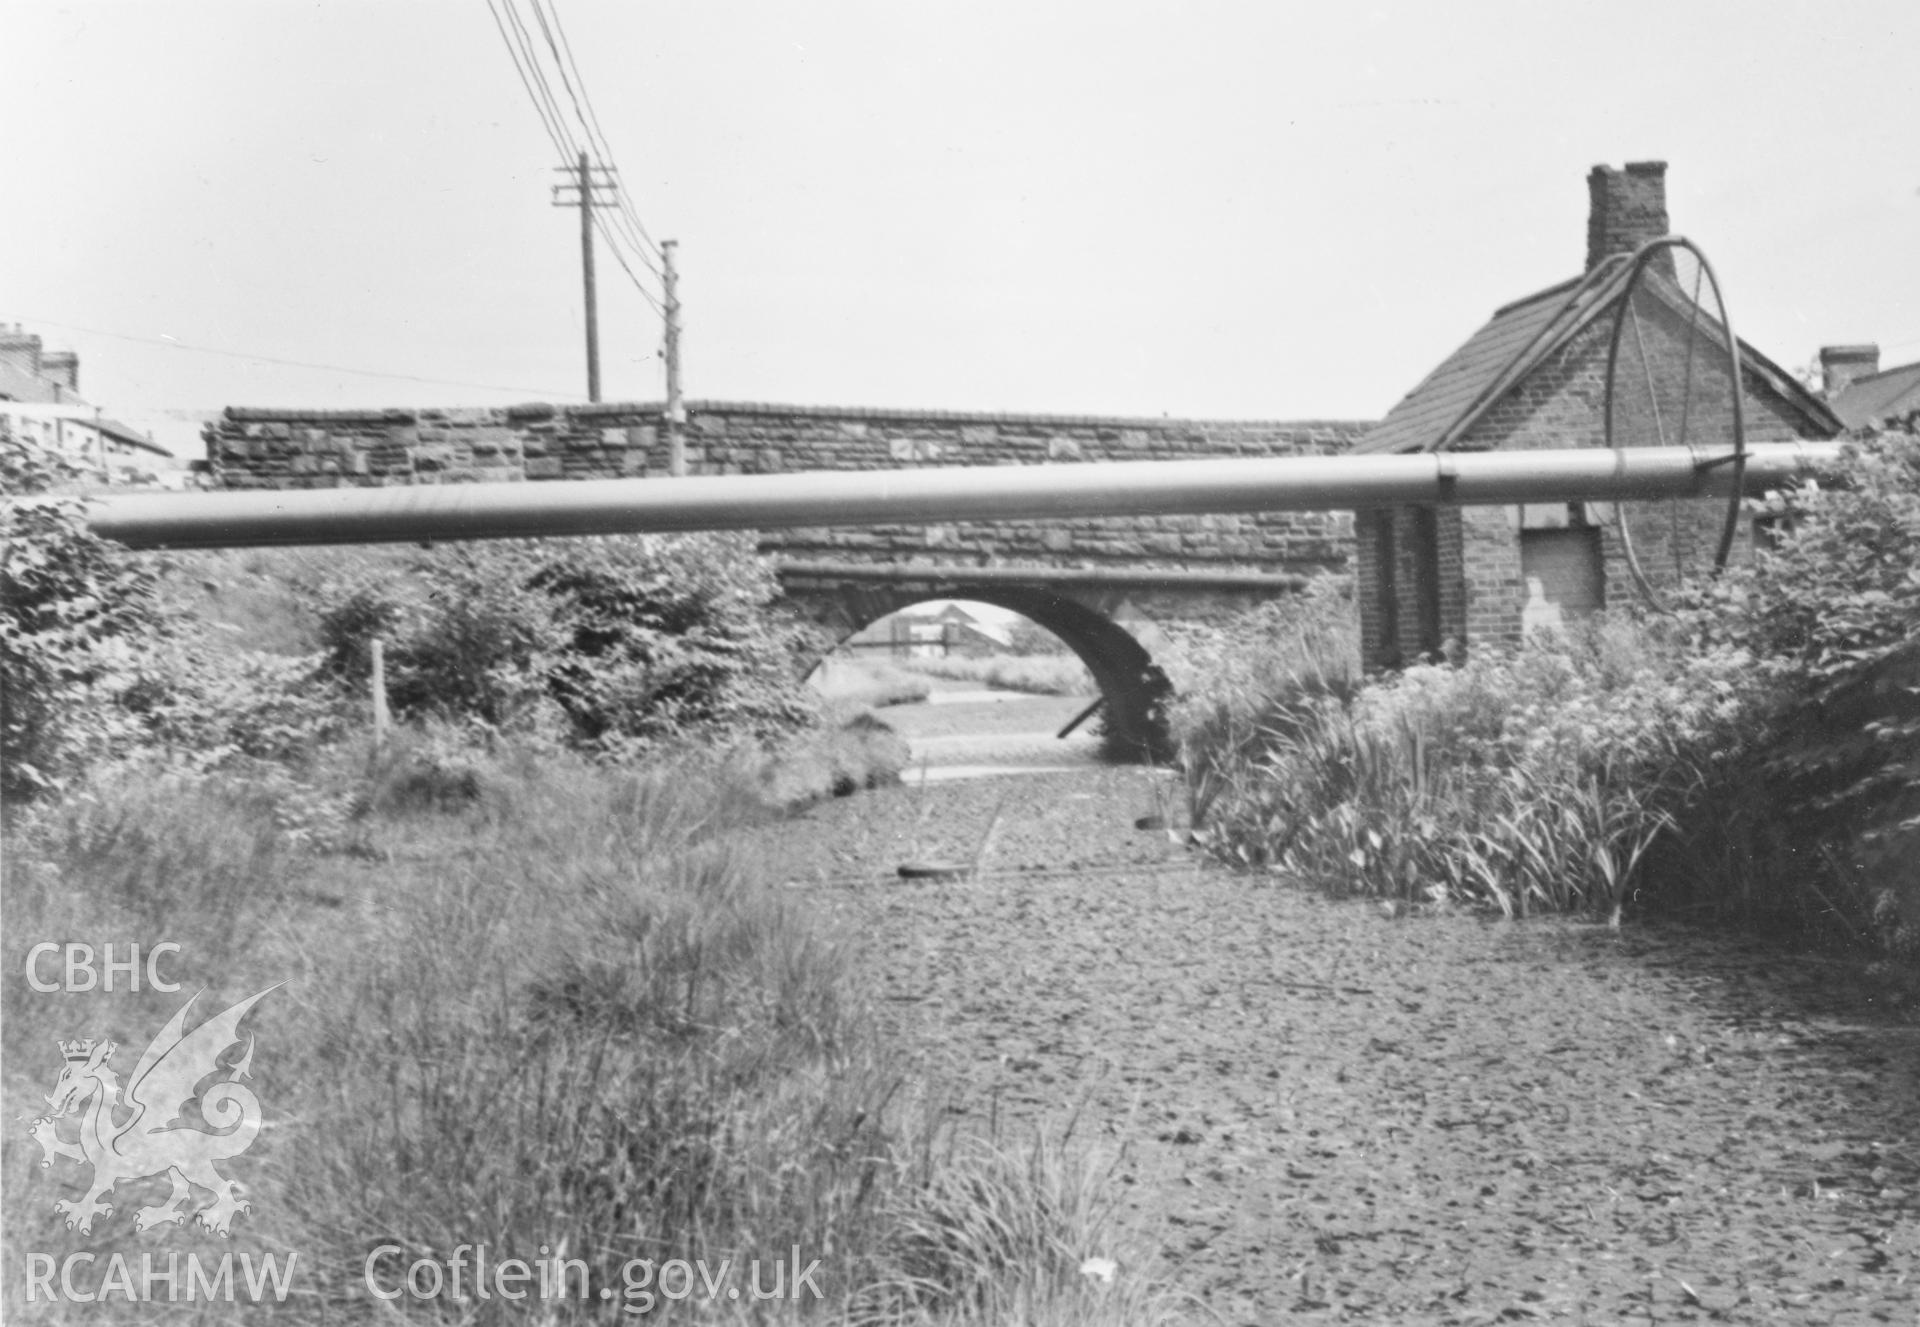 Black and white acetate negative showing view of a bridge at Morriston.